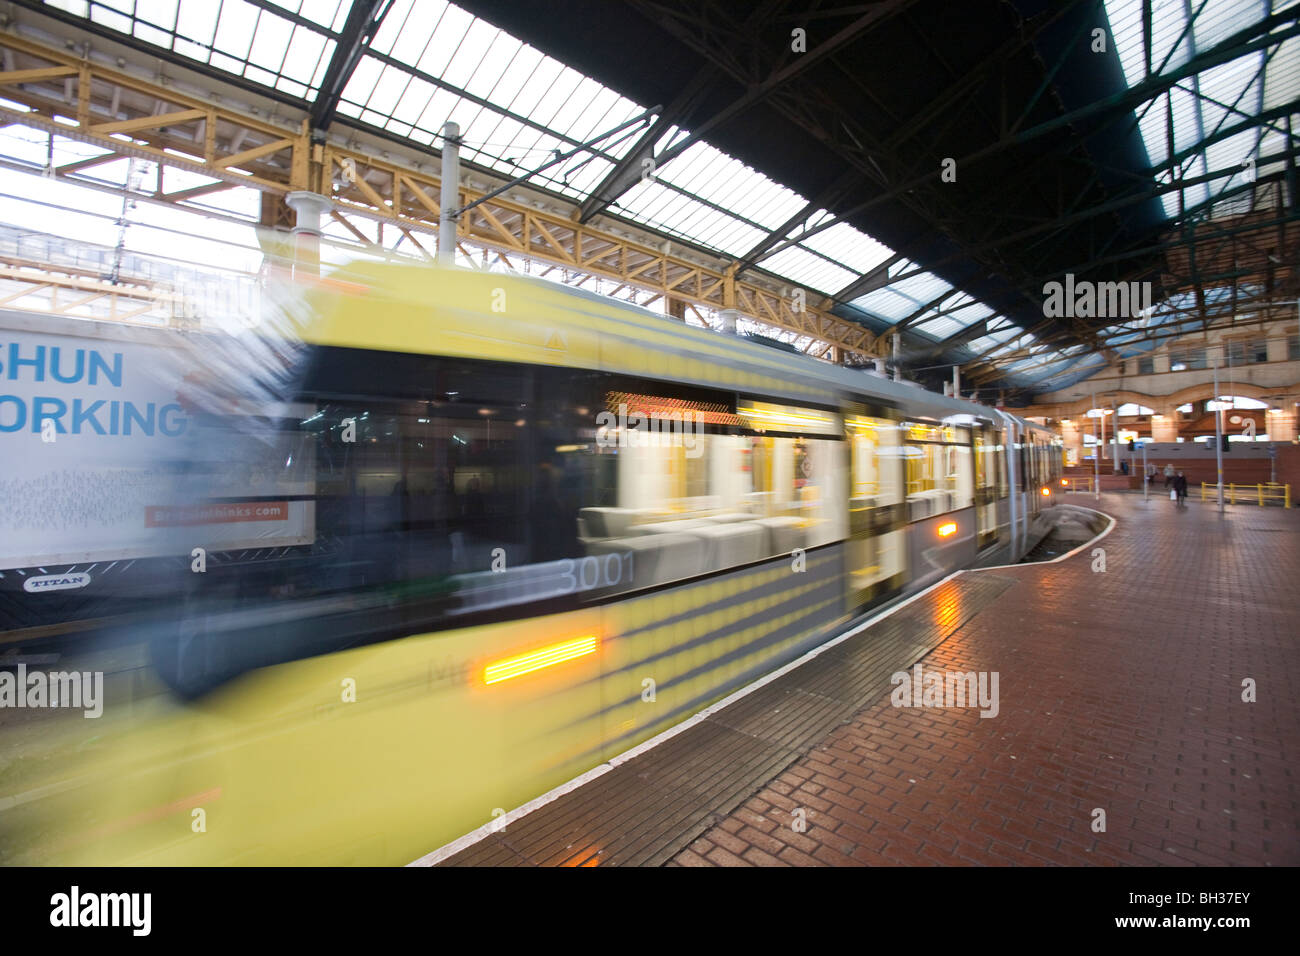 New Metro Trams in Manchester city centre, UK. Stock Photo